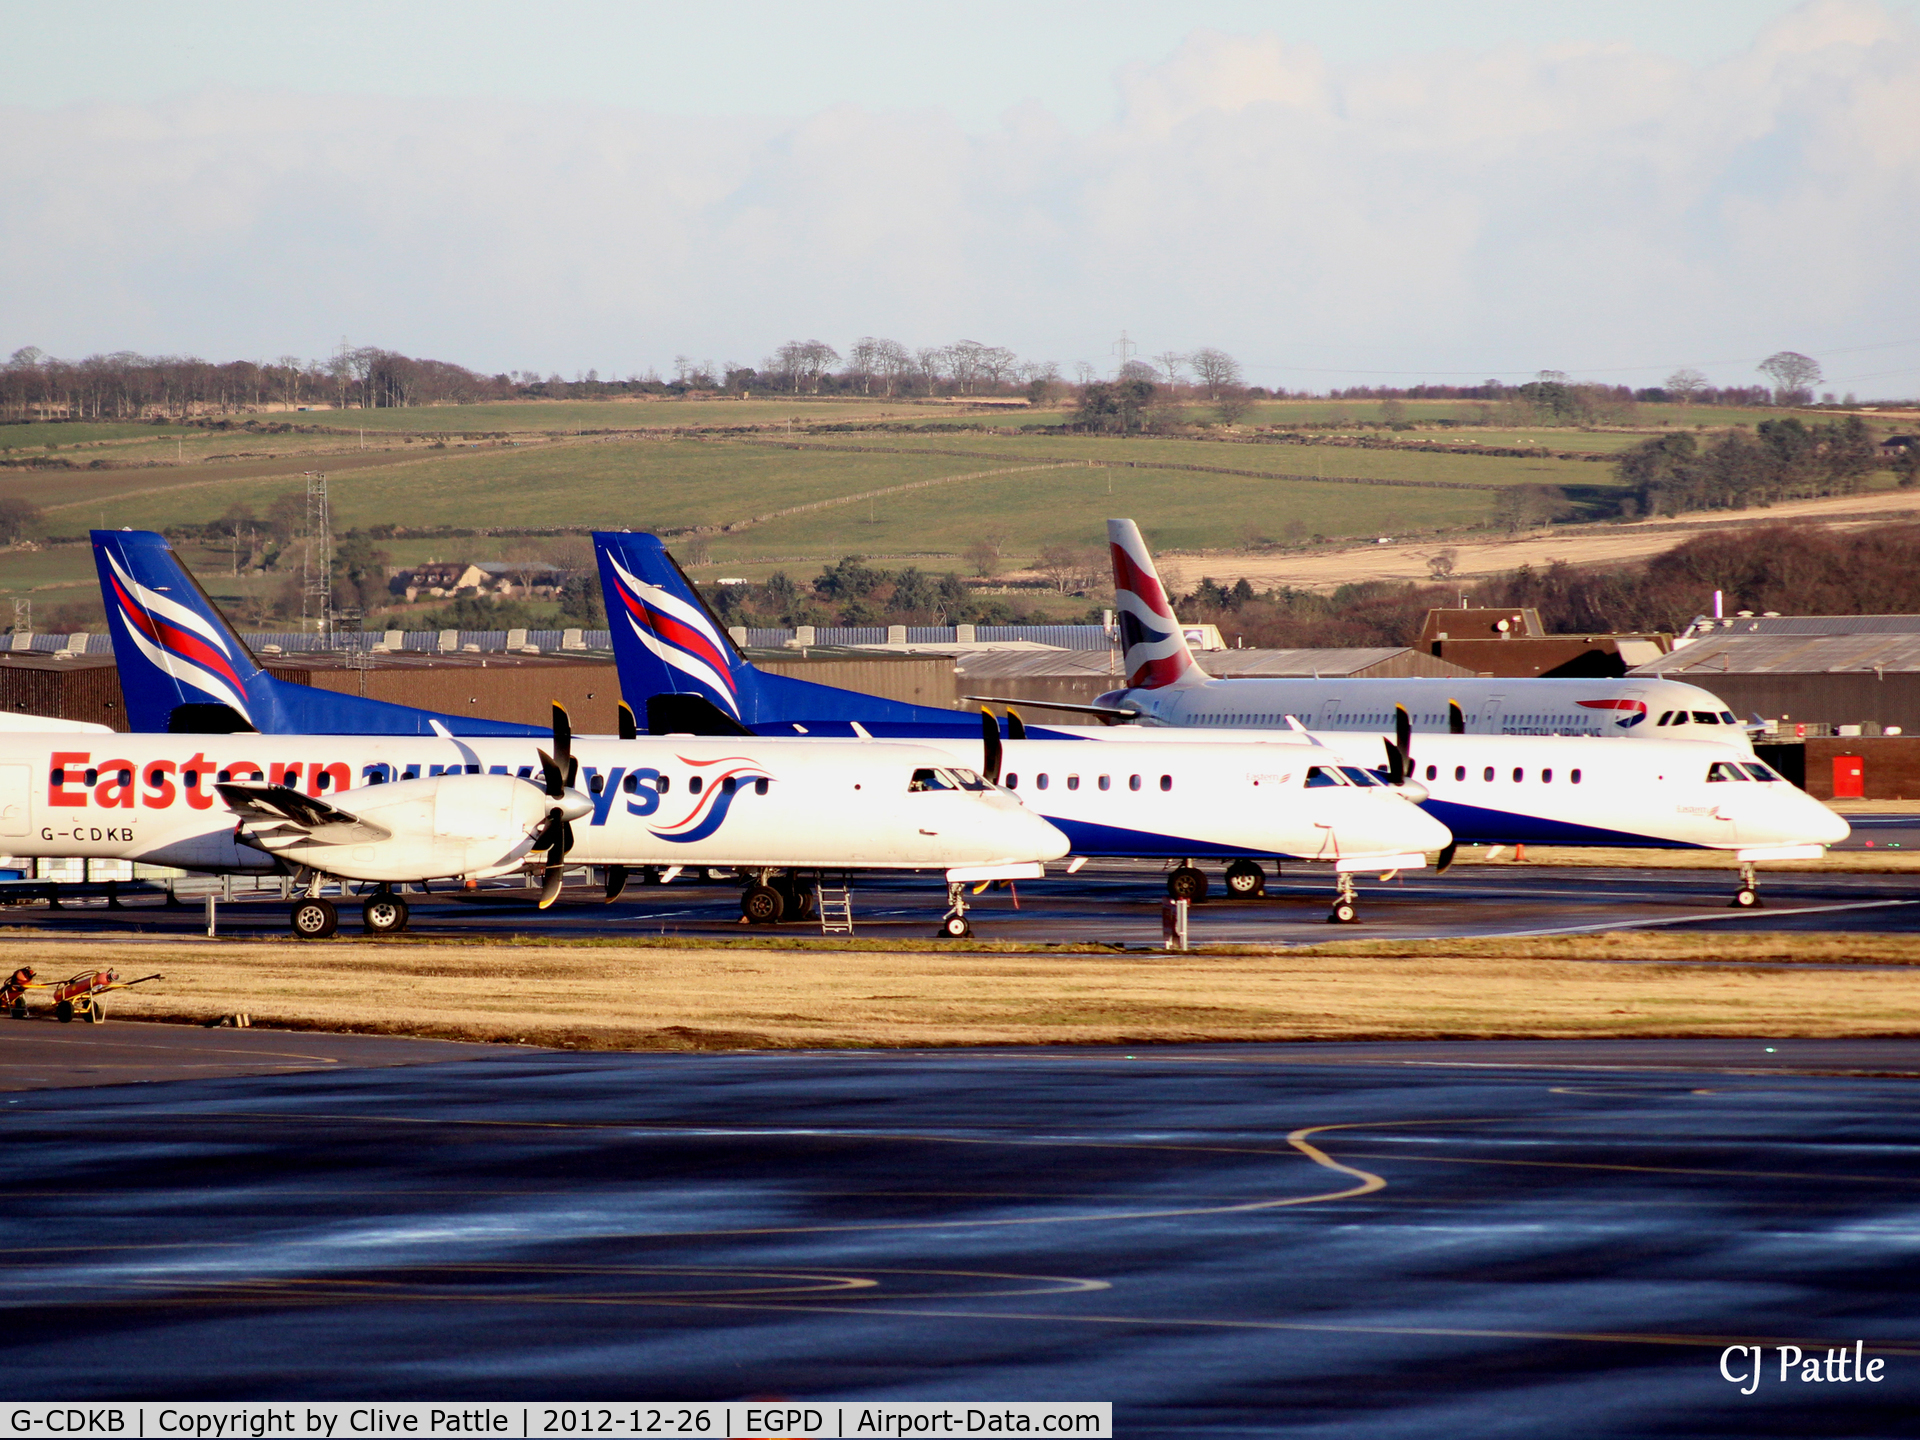 G-CDKB, 1996 Saab 2000 C/N 2000-032, 'KB, on left of line-up at Aberdeen EGPD Boxing Day sunset